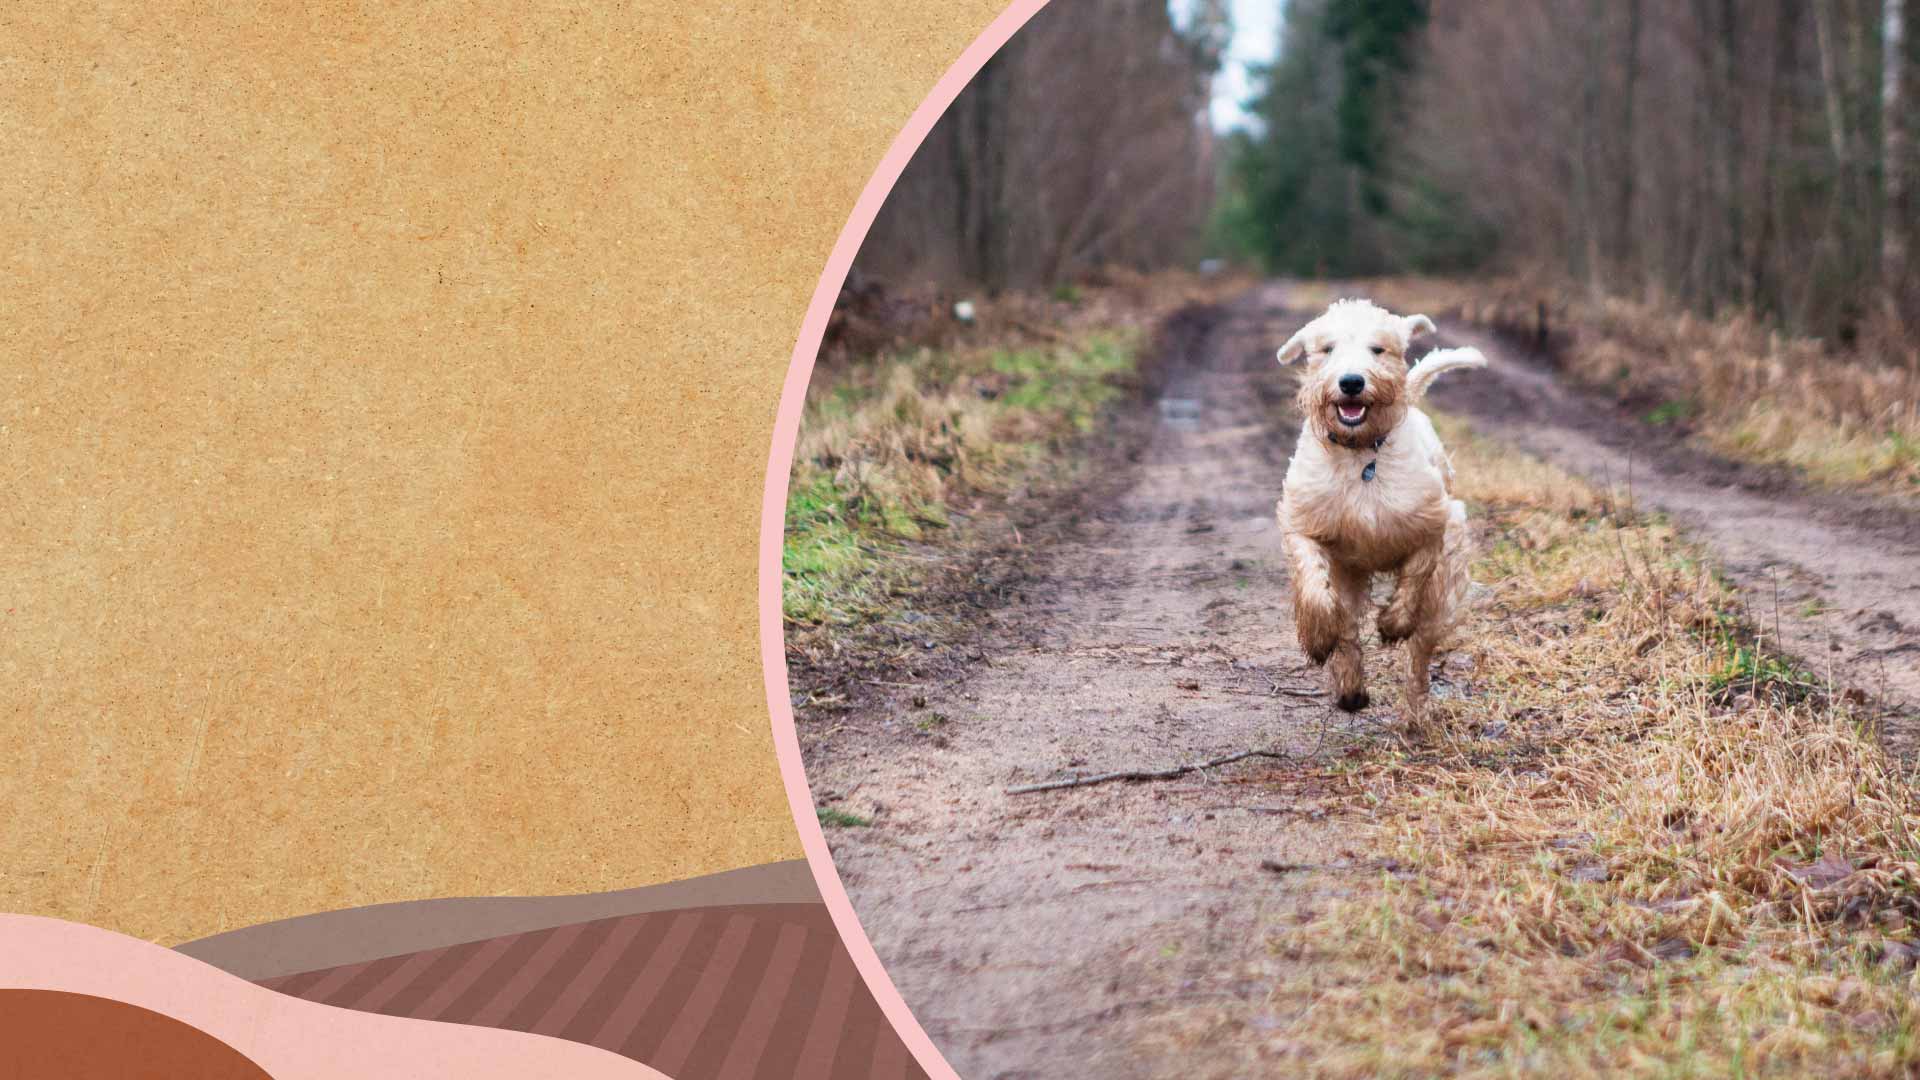 Dog running along a muddy path with textured background below and countryside illustration at the bottom